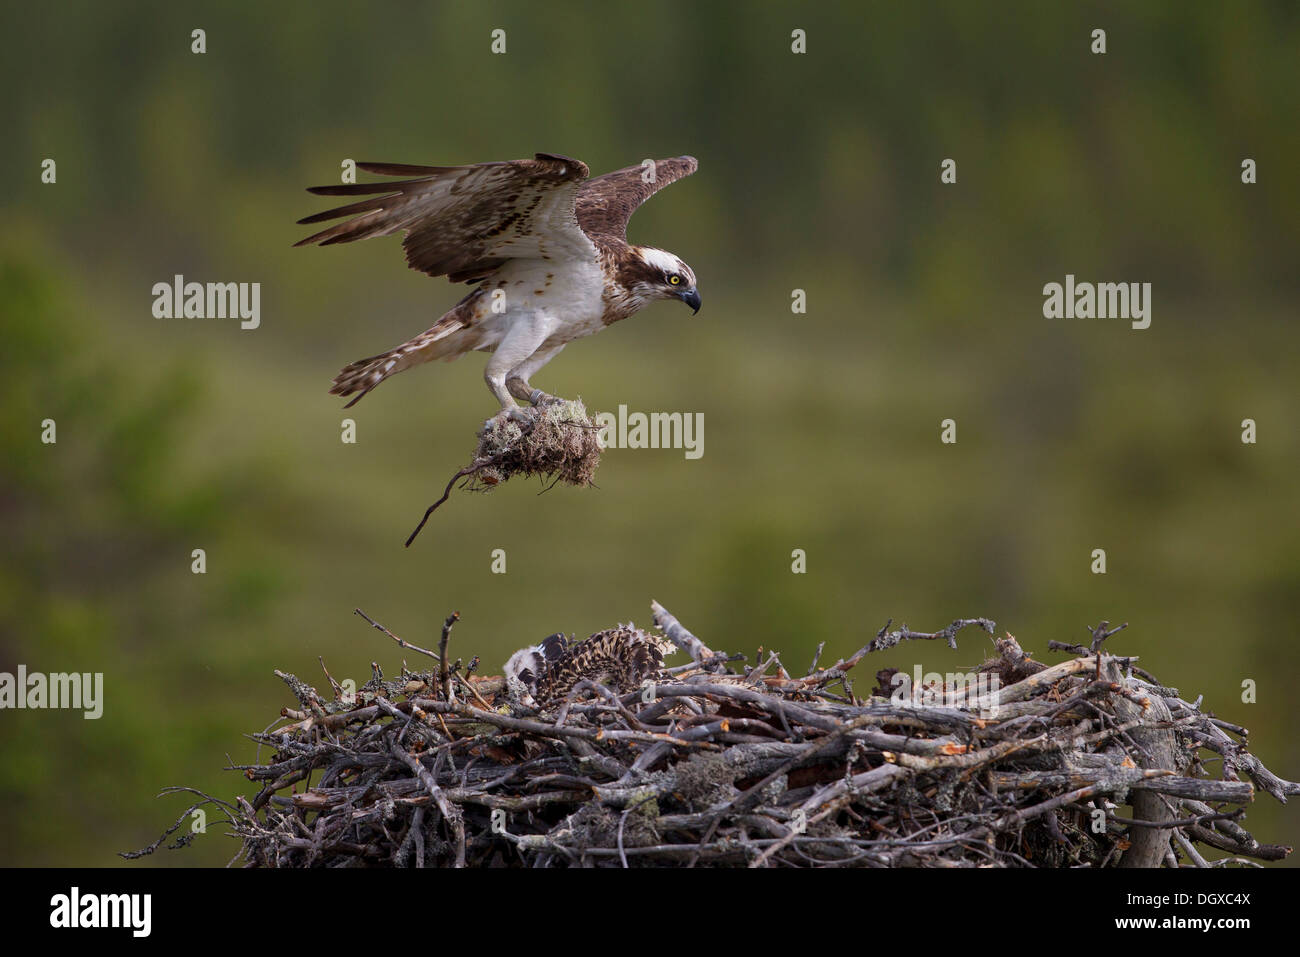 Osprey or Sea Hawk (Pandion haliaetus) with nesting material approaching to land on an eyrie, Kajaani sub-region, Finland Stock Photo